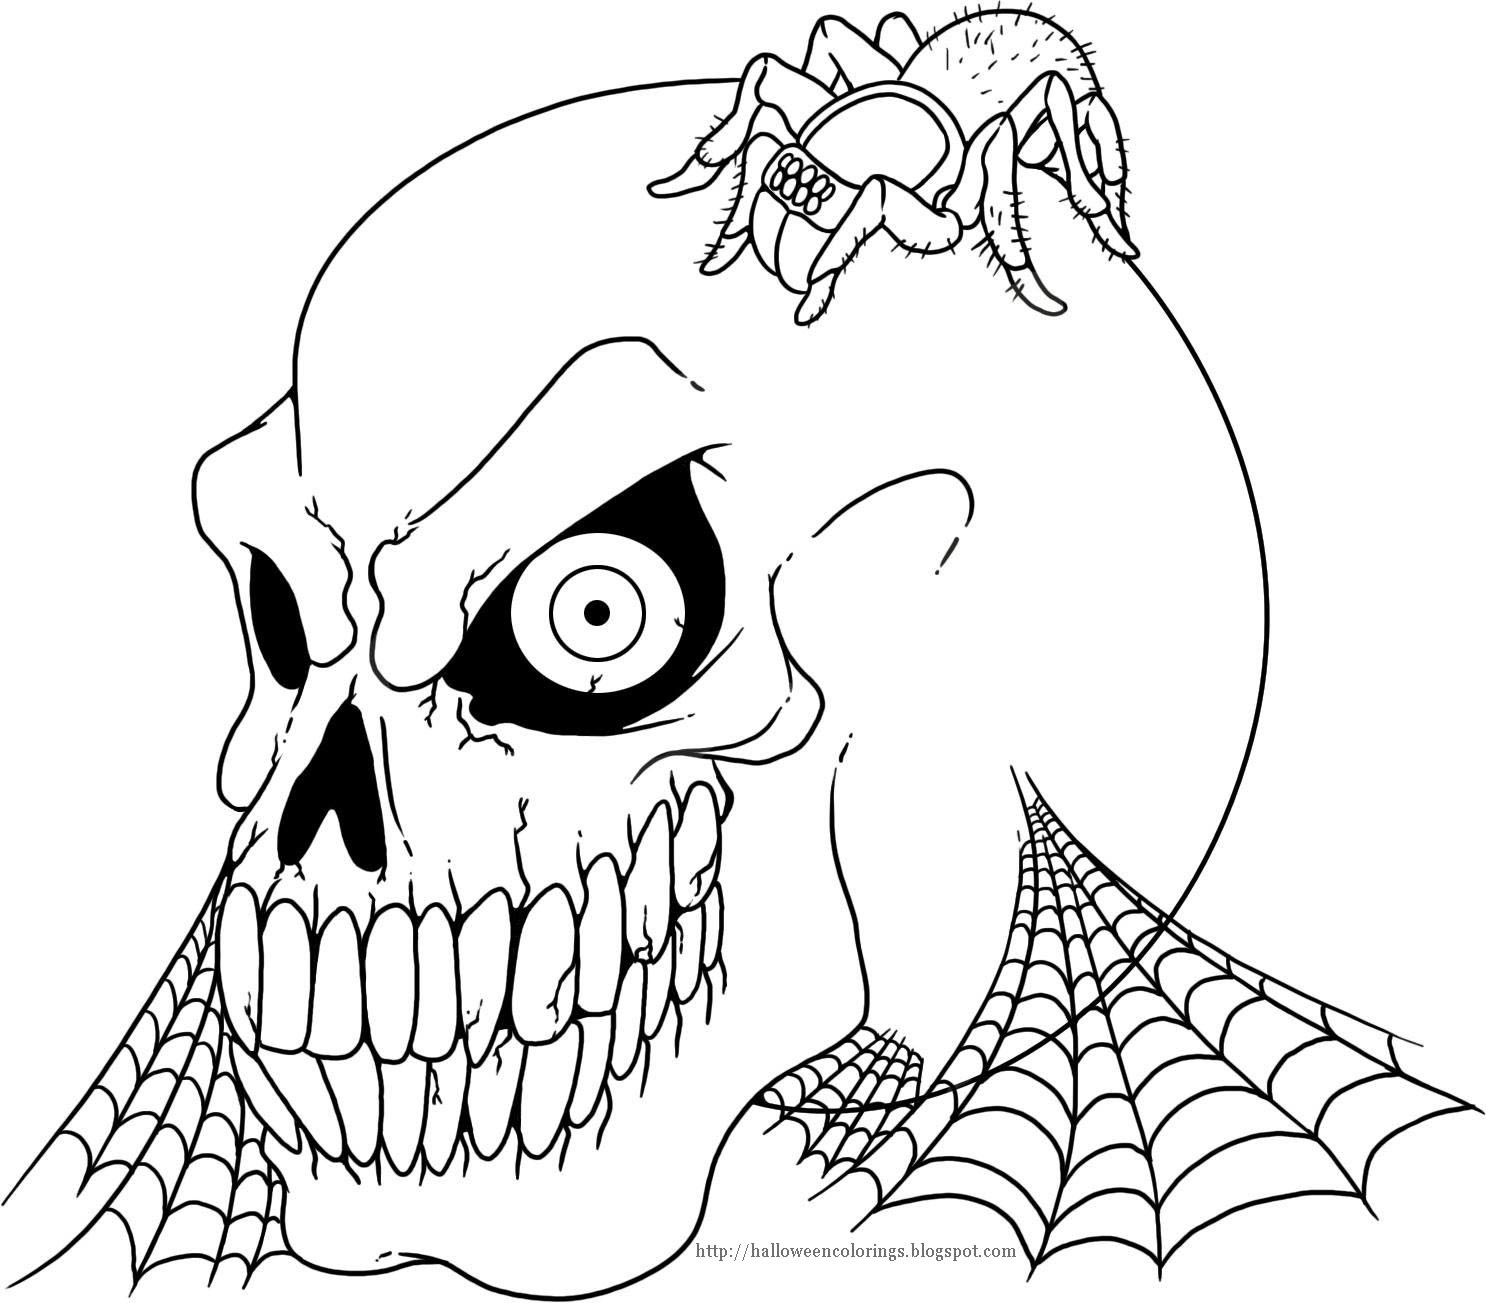 Halloween Printable Coloring Pages
 HALLOWEEN COLORINGS